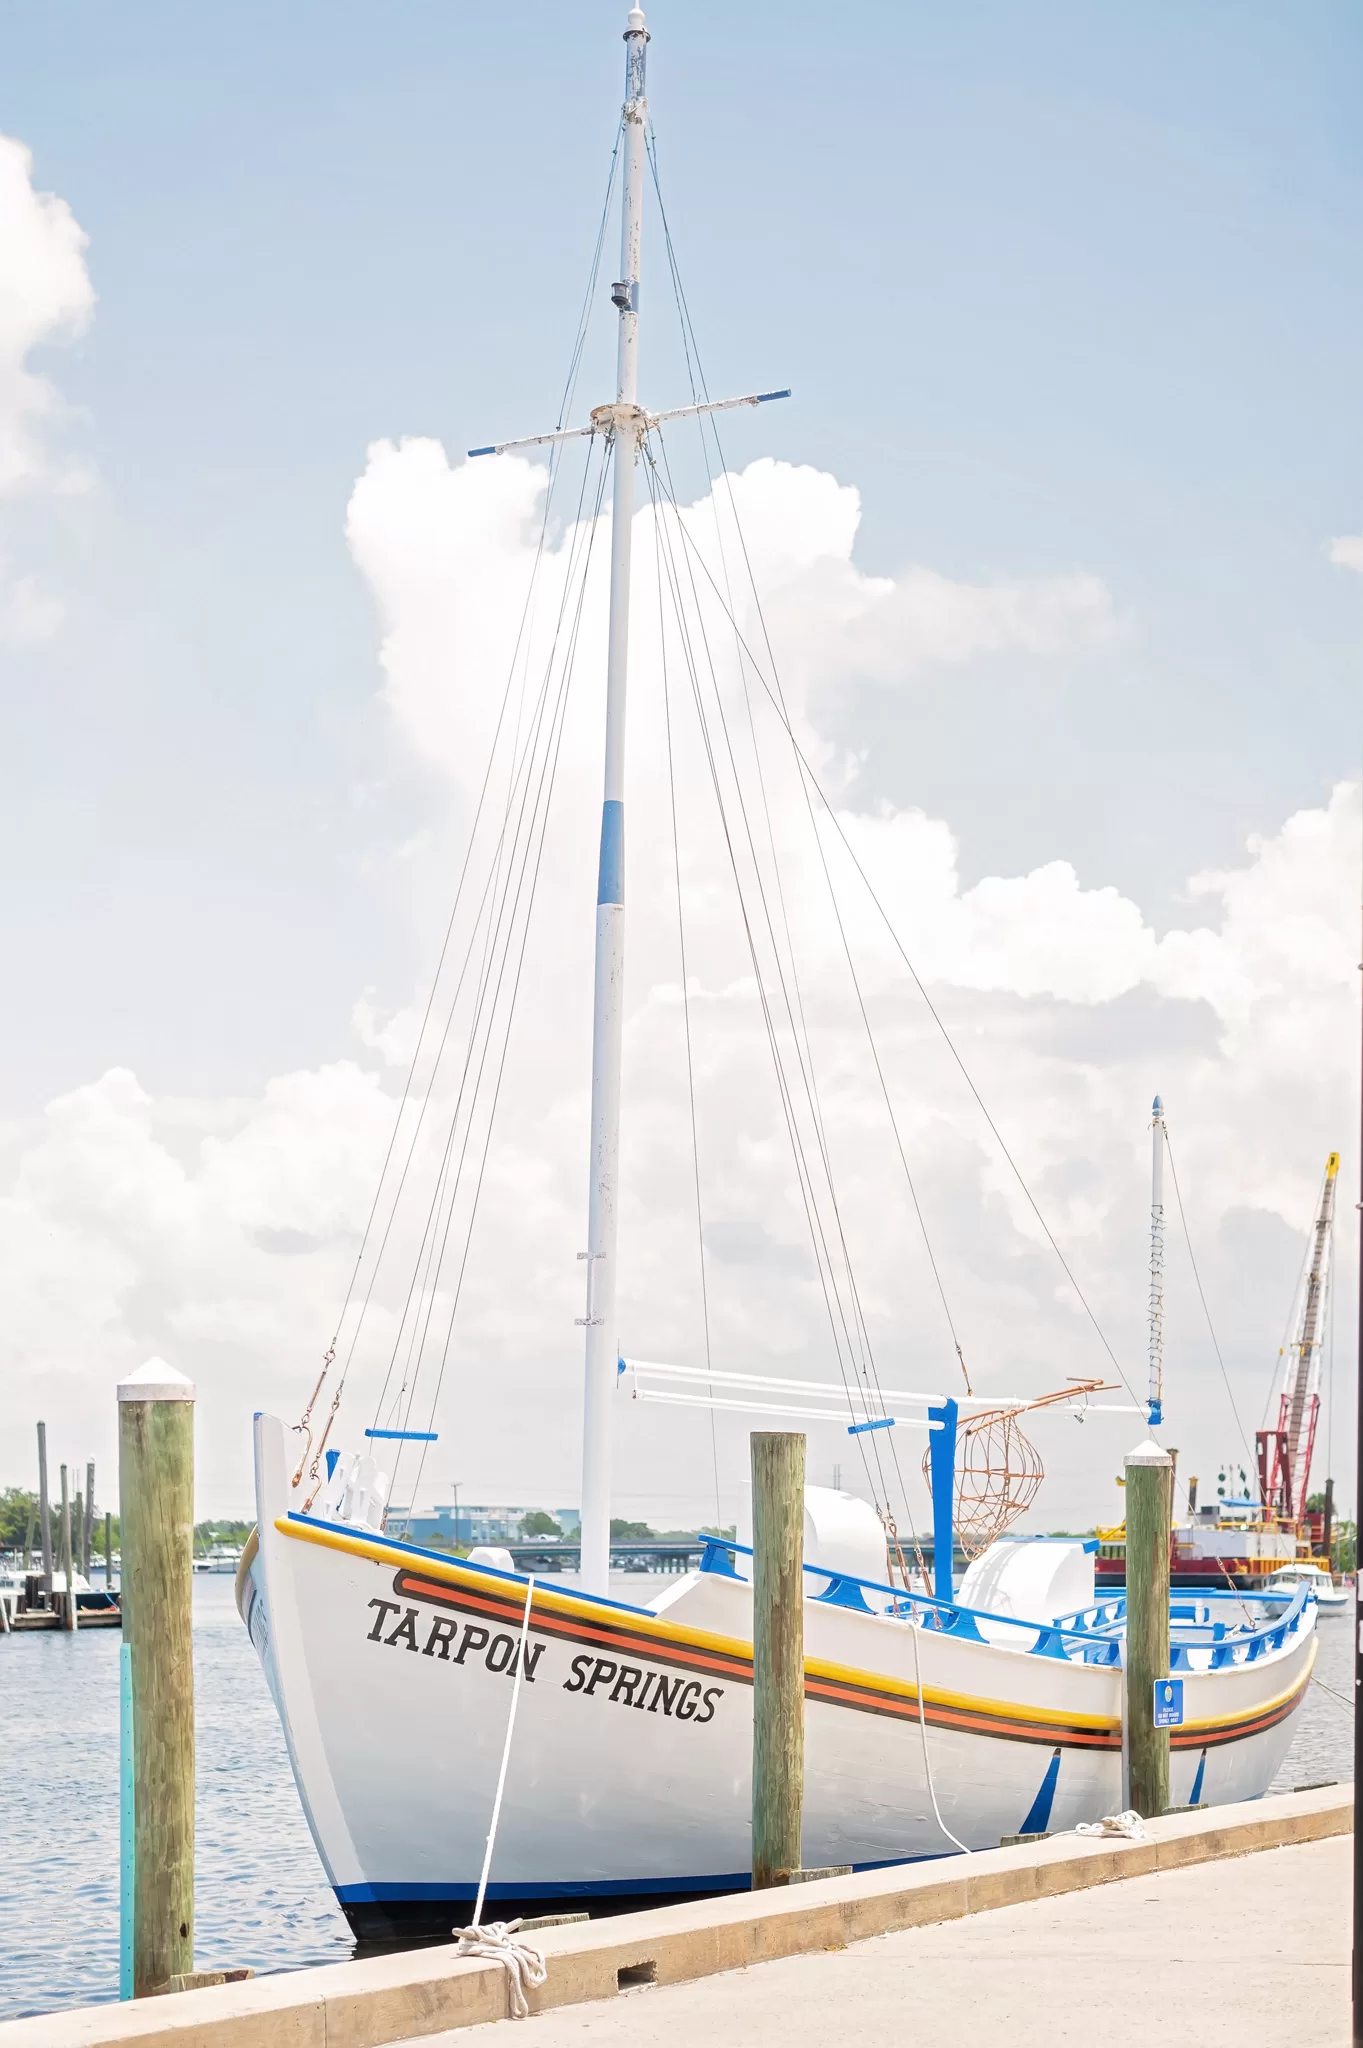 This image is for a blog post about Tarpon Springs Florida and shows a boat downtown that says Tarpon Springs.